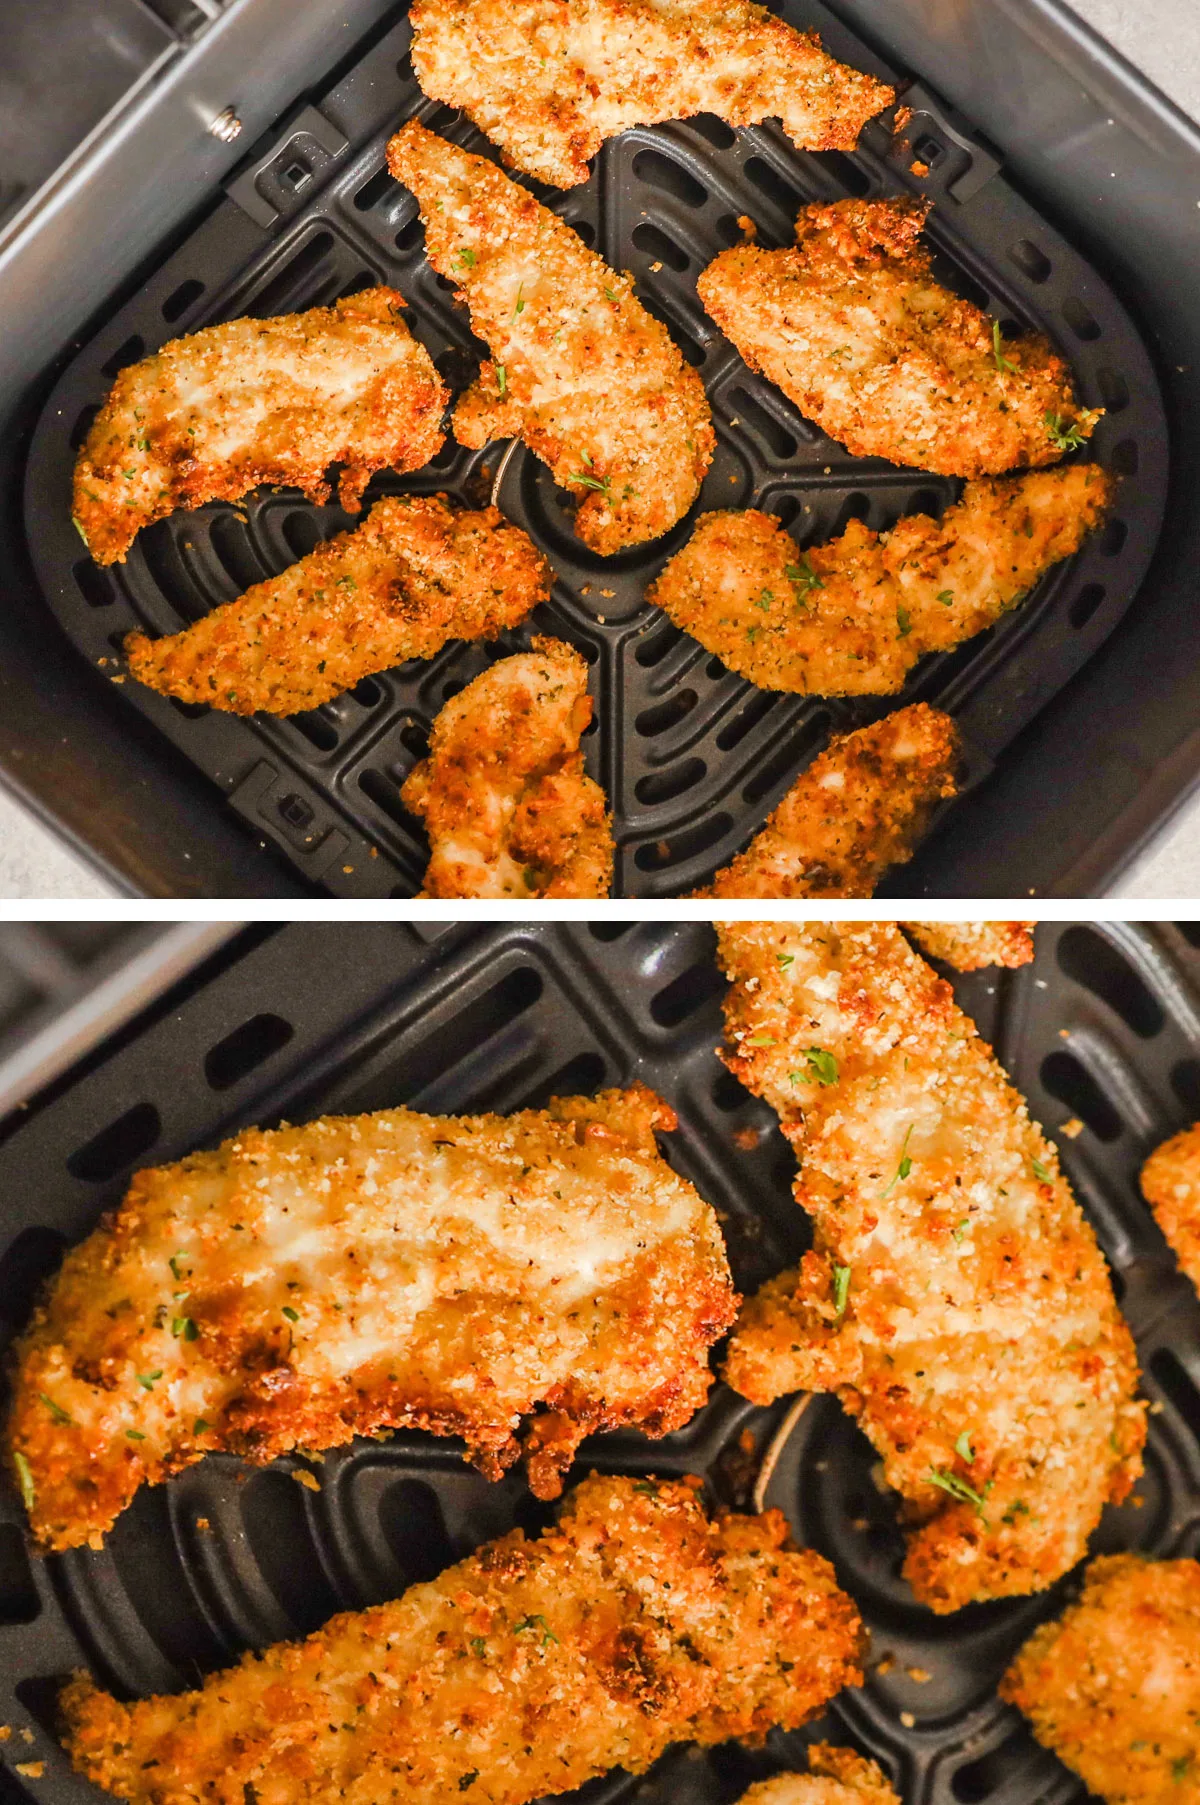 Two images of chicken tenders cooked in an air fryer basket.